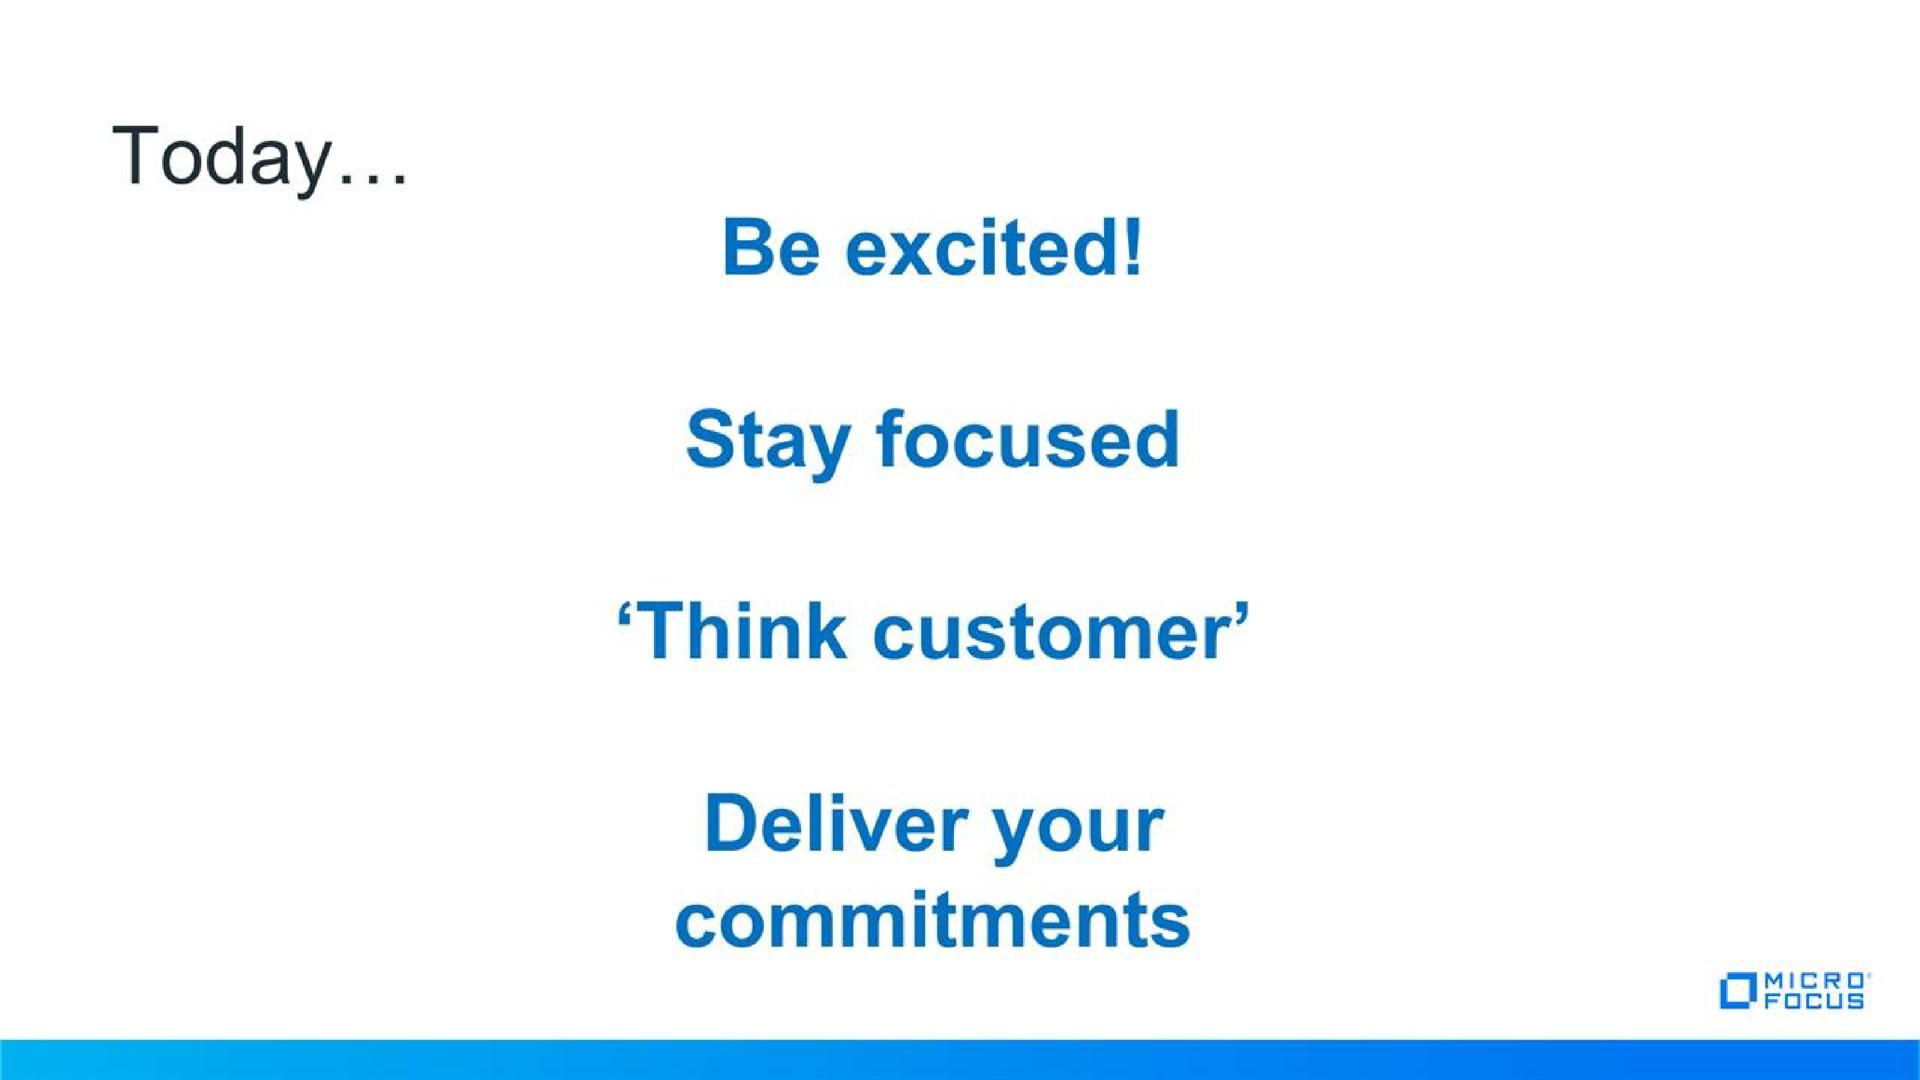 today be excited stay focused think customer deliver your commitments | Micro Focus